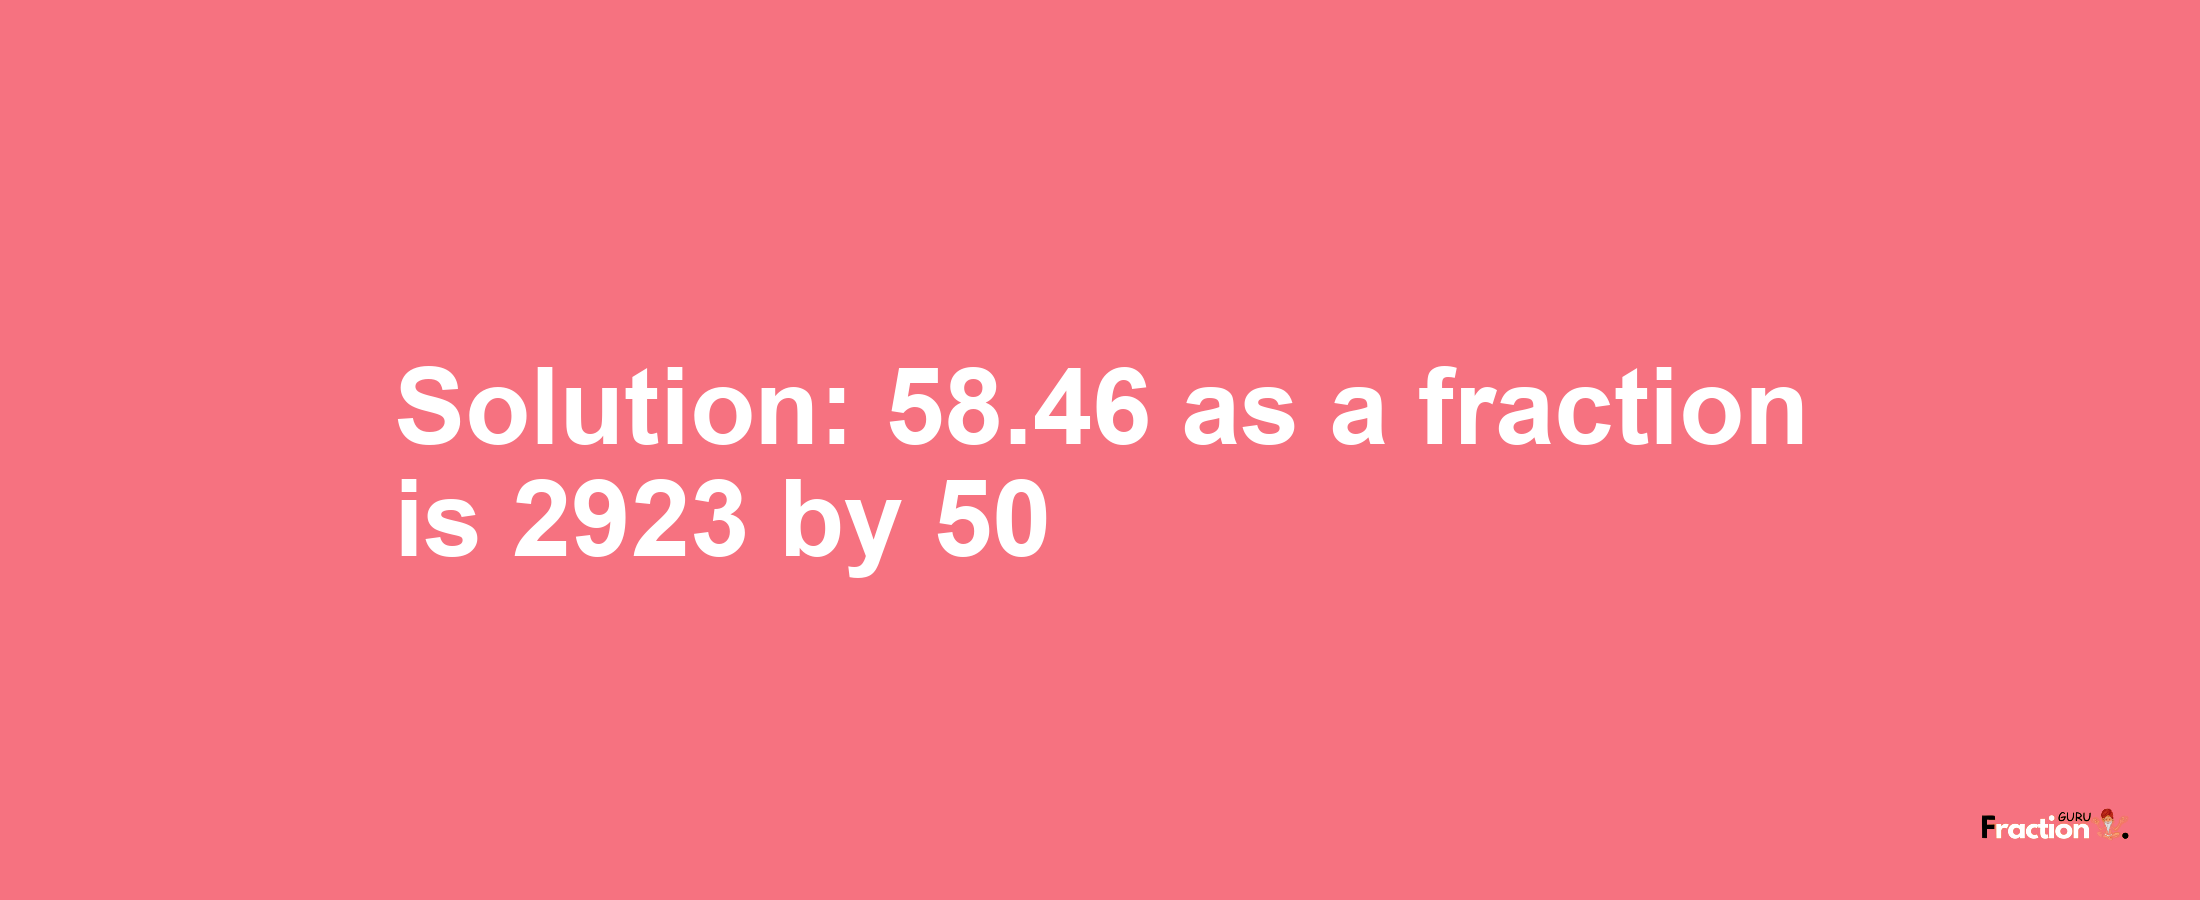 Solution:58.46 as a fraction is 2923/50